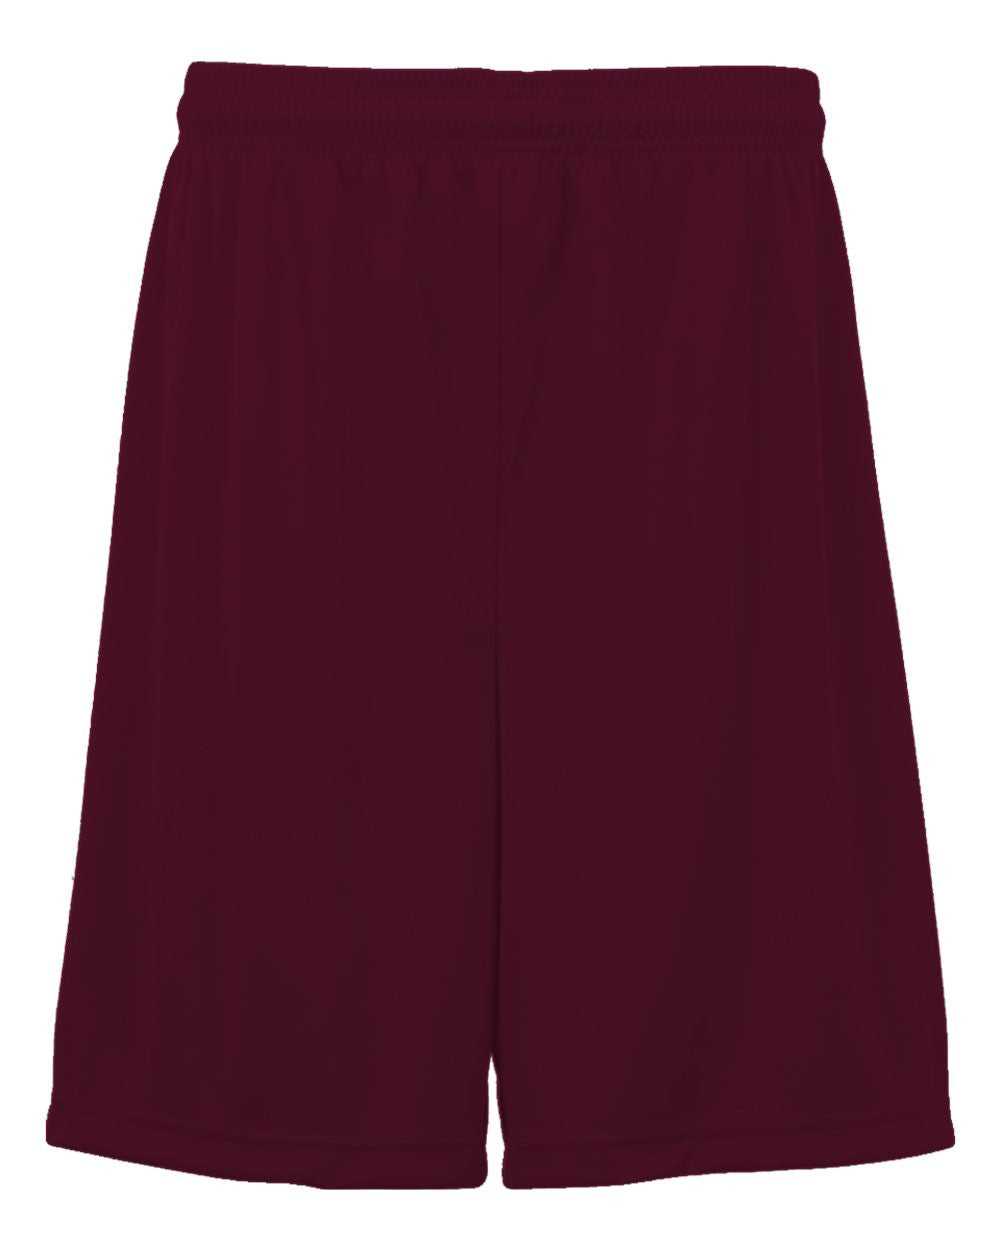 C2 Sport 5229 Youth Performance Short - Maroon - HIT a Double - 1